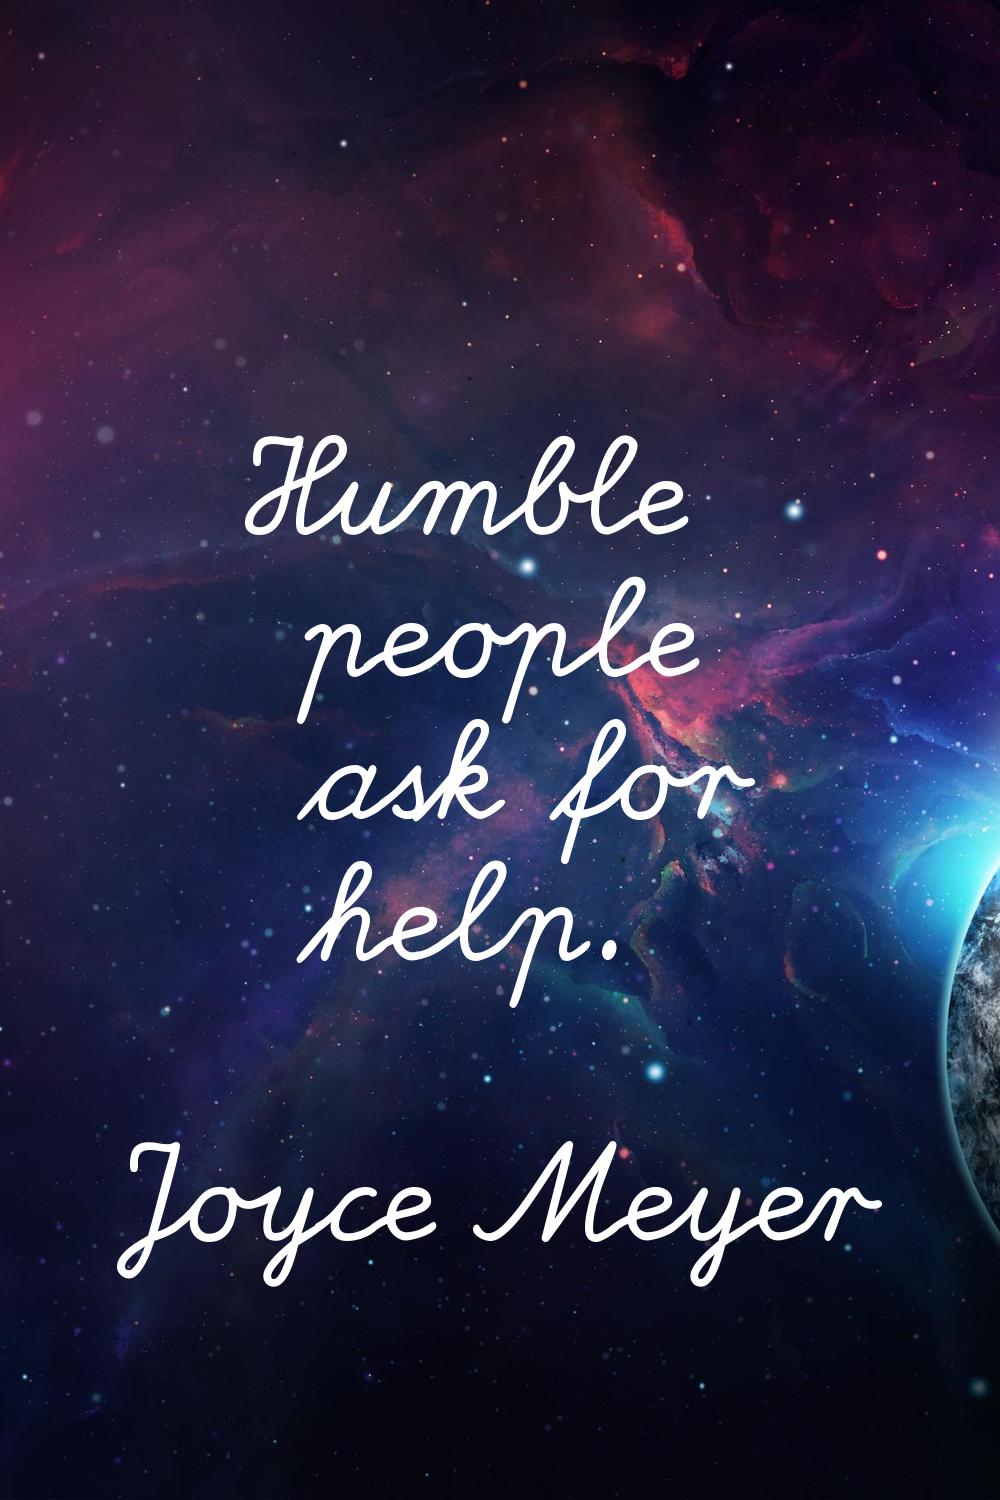 Humble people ask for help.